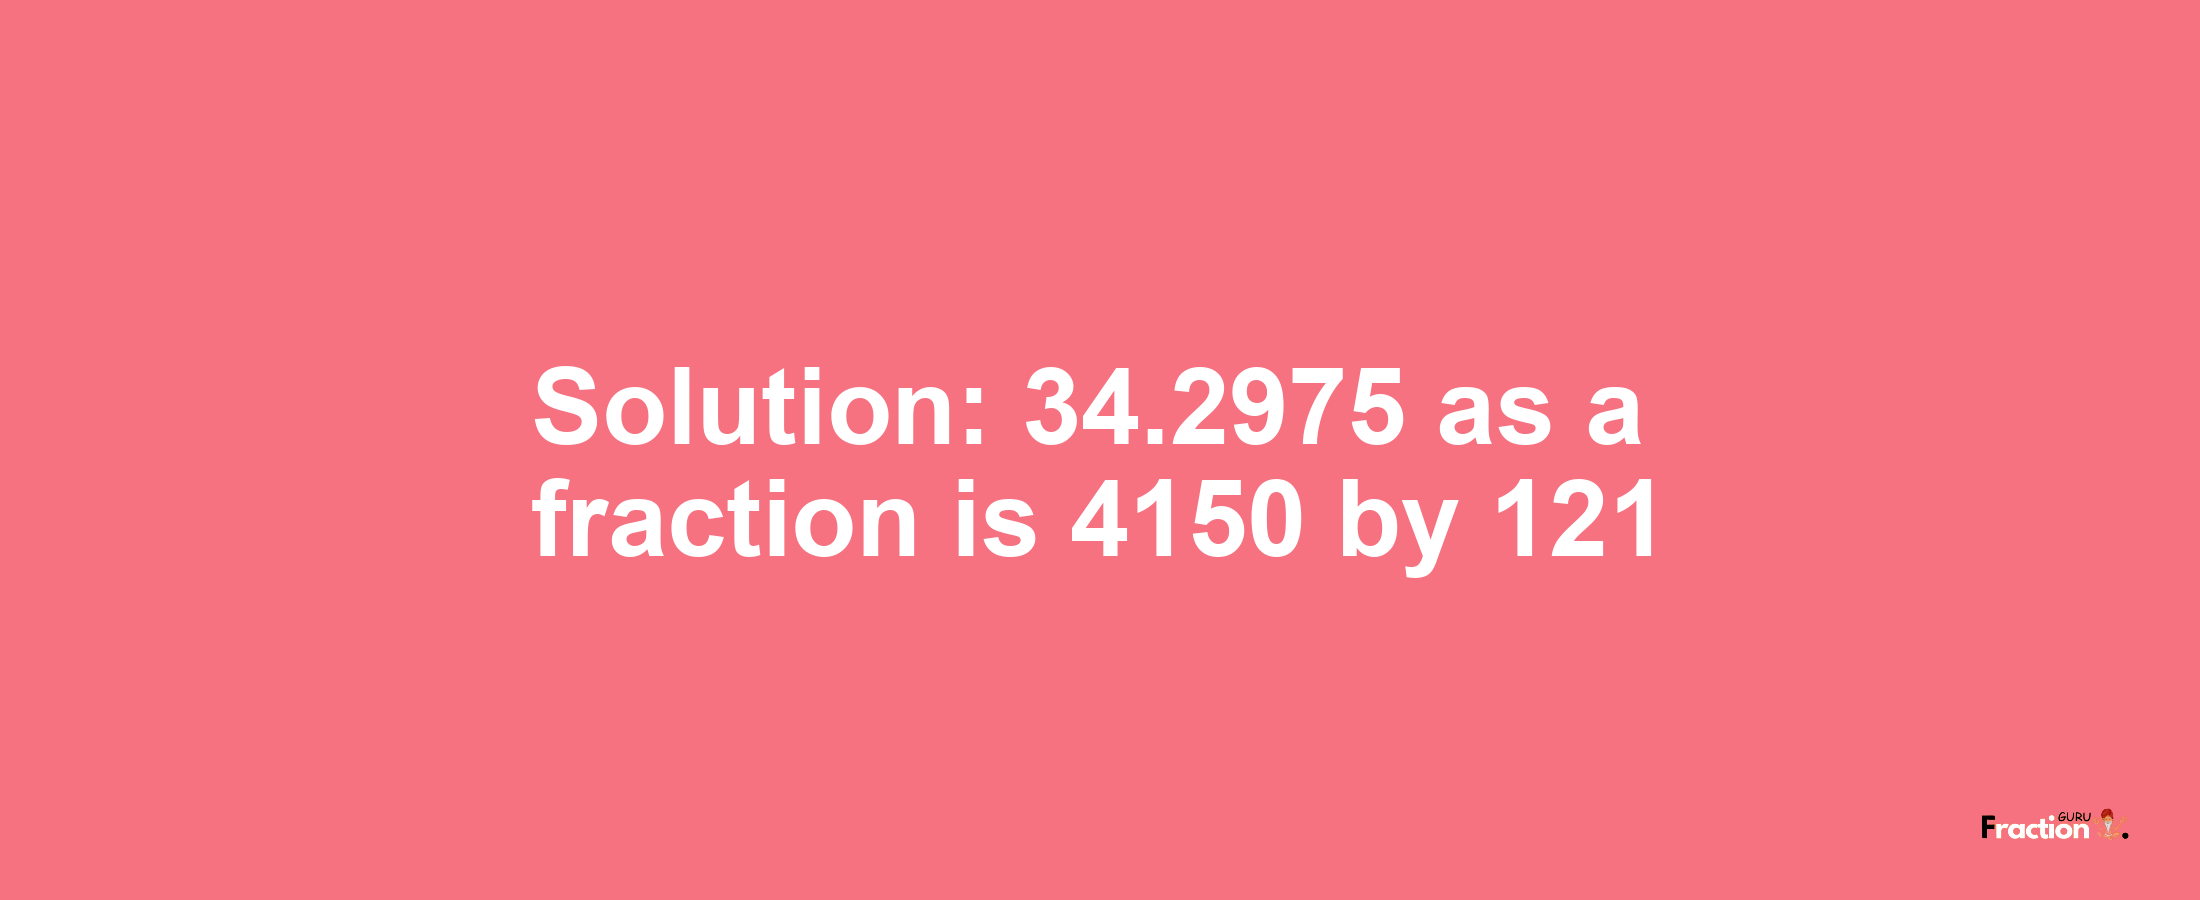 Solution:34.2975 as a fraction is 4150/121